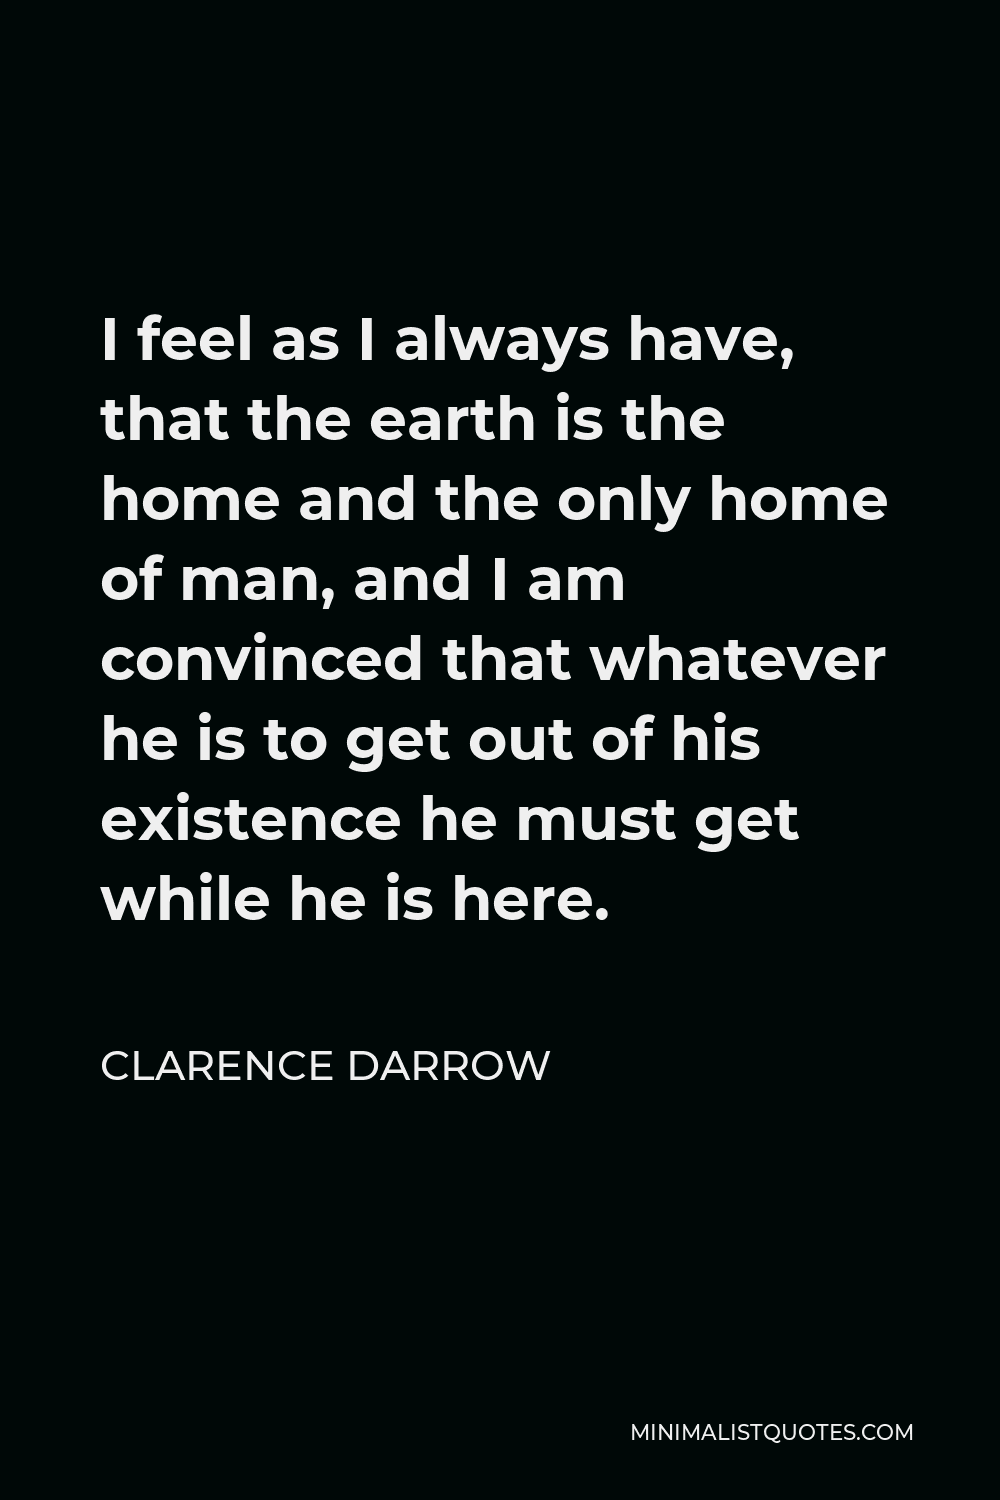 Clarence Darrow Quote - I feel as I always have, that the earth is the home and the only home of man, and I am convinced that whatever he is to get out of his existence he must get while he is here.